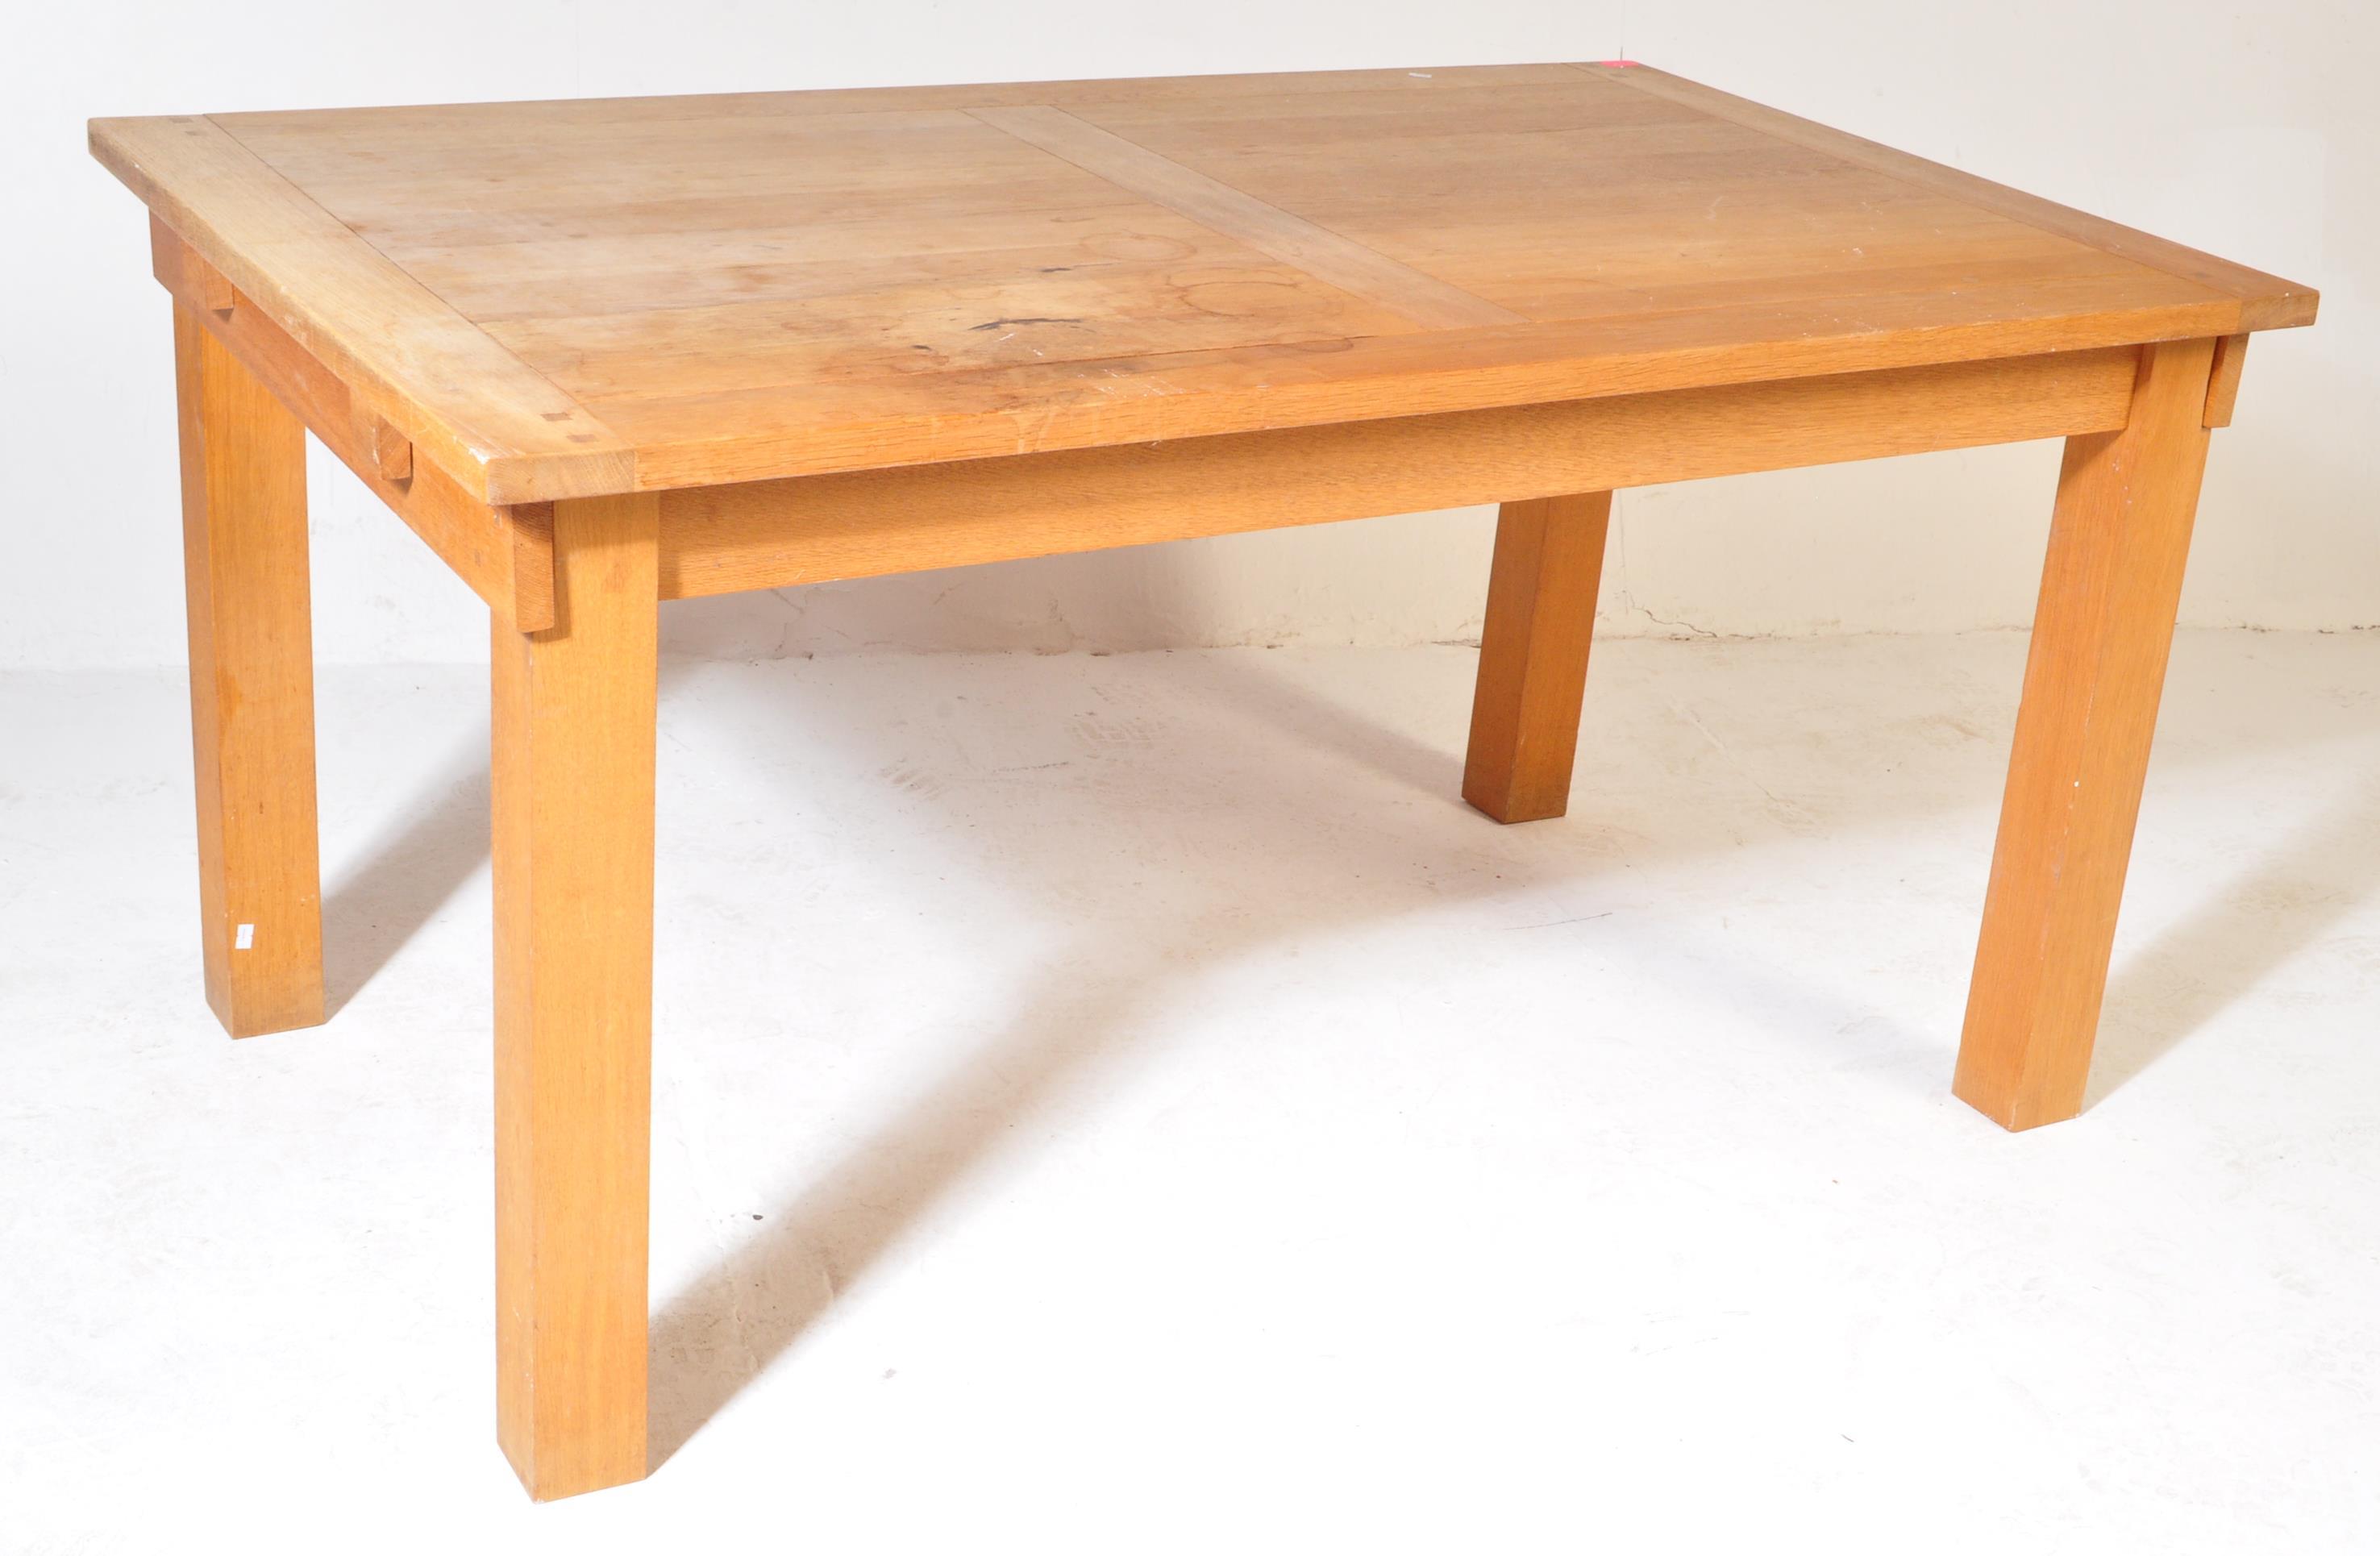 CONTEMPORARY MODERNIST OAK FURNITURE LAND DINING TABLE - Image 2 of 5